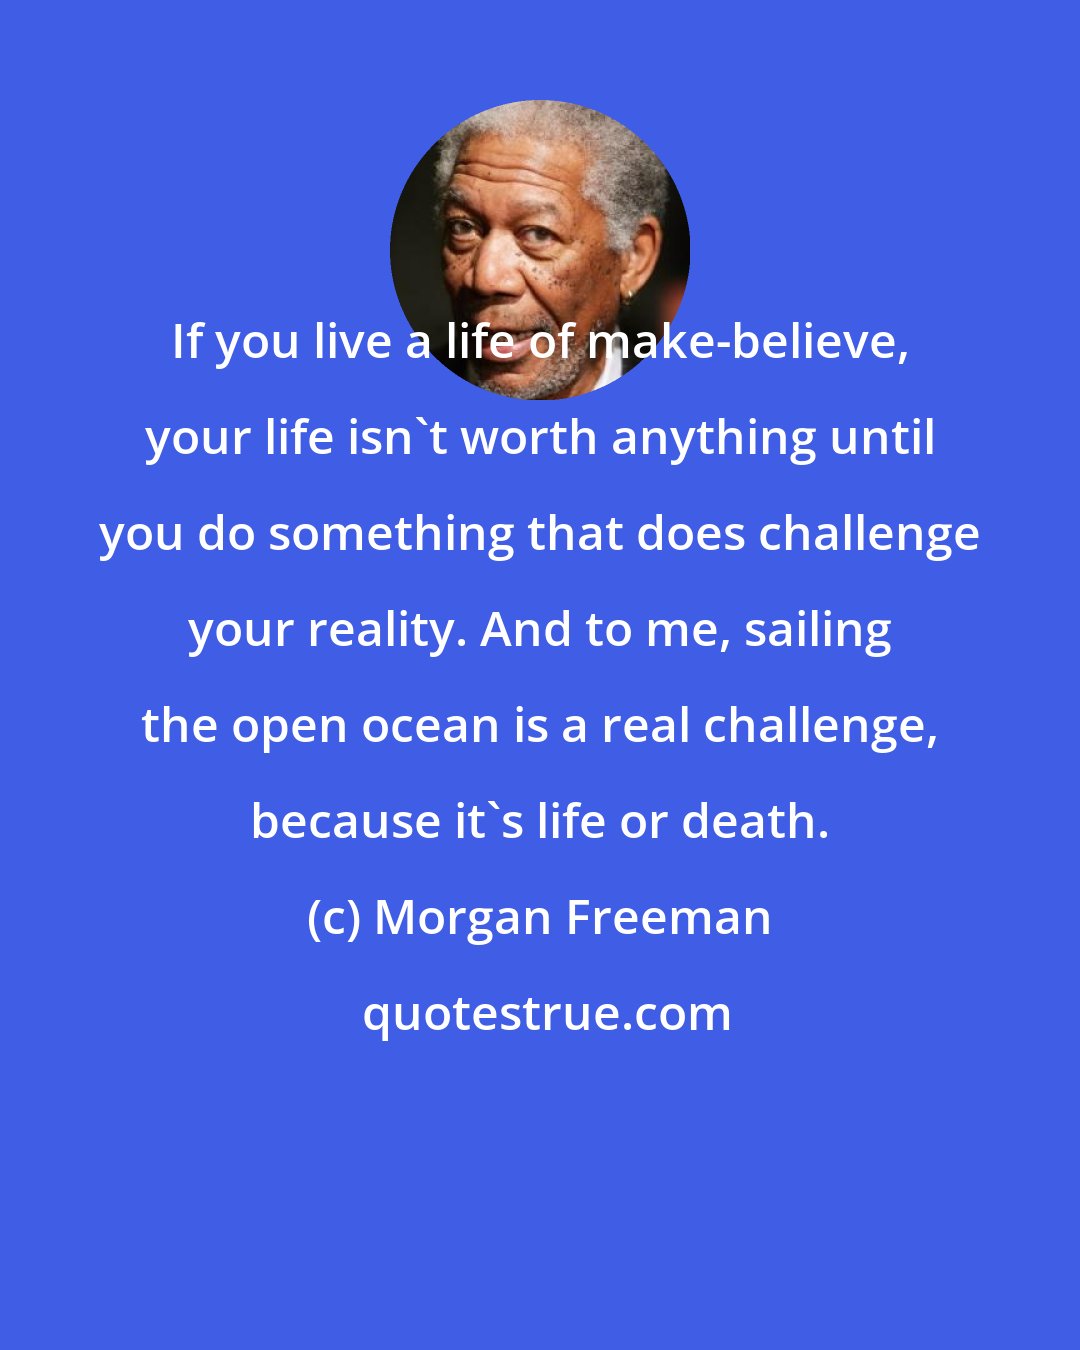 Morgan Freeman: If you live a life of make-believe, your life isn't worth anything until you do something that does challenge your reality. And to me, sailing the open ocean is a real challenge, because it's life or death.